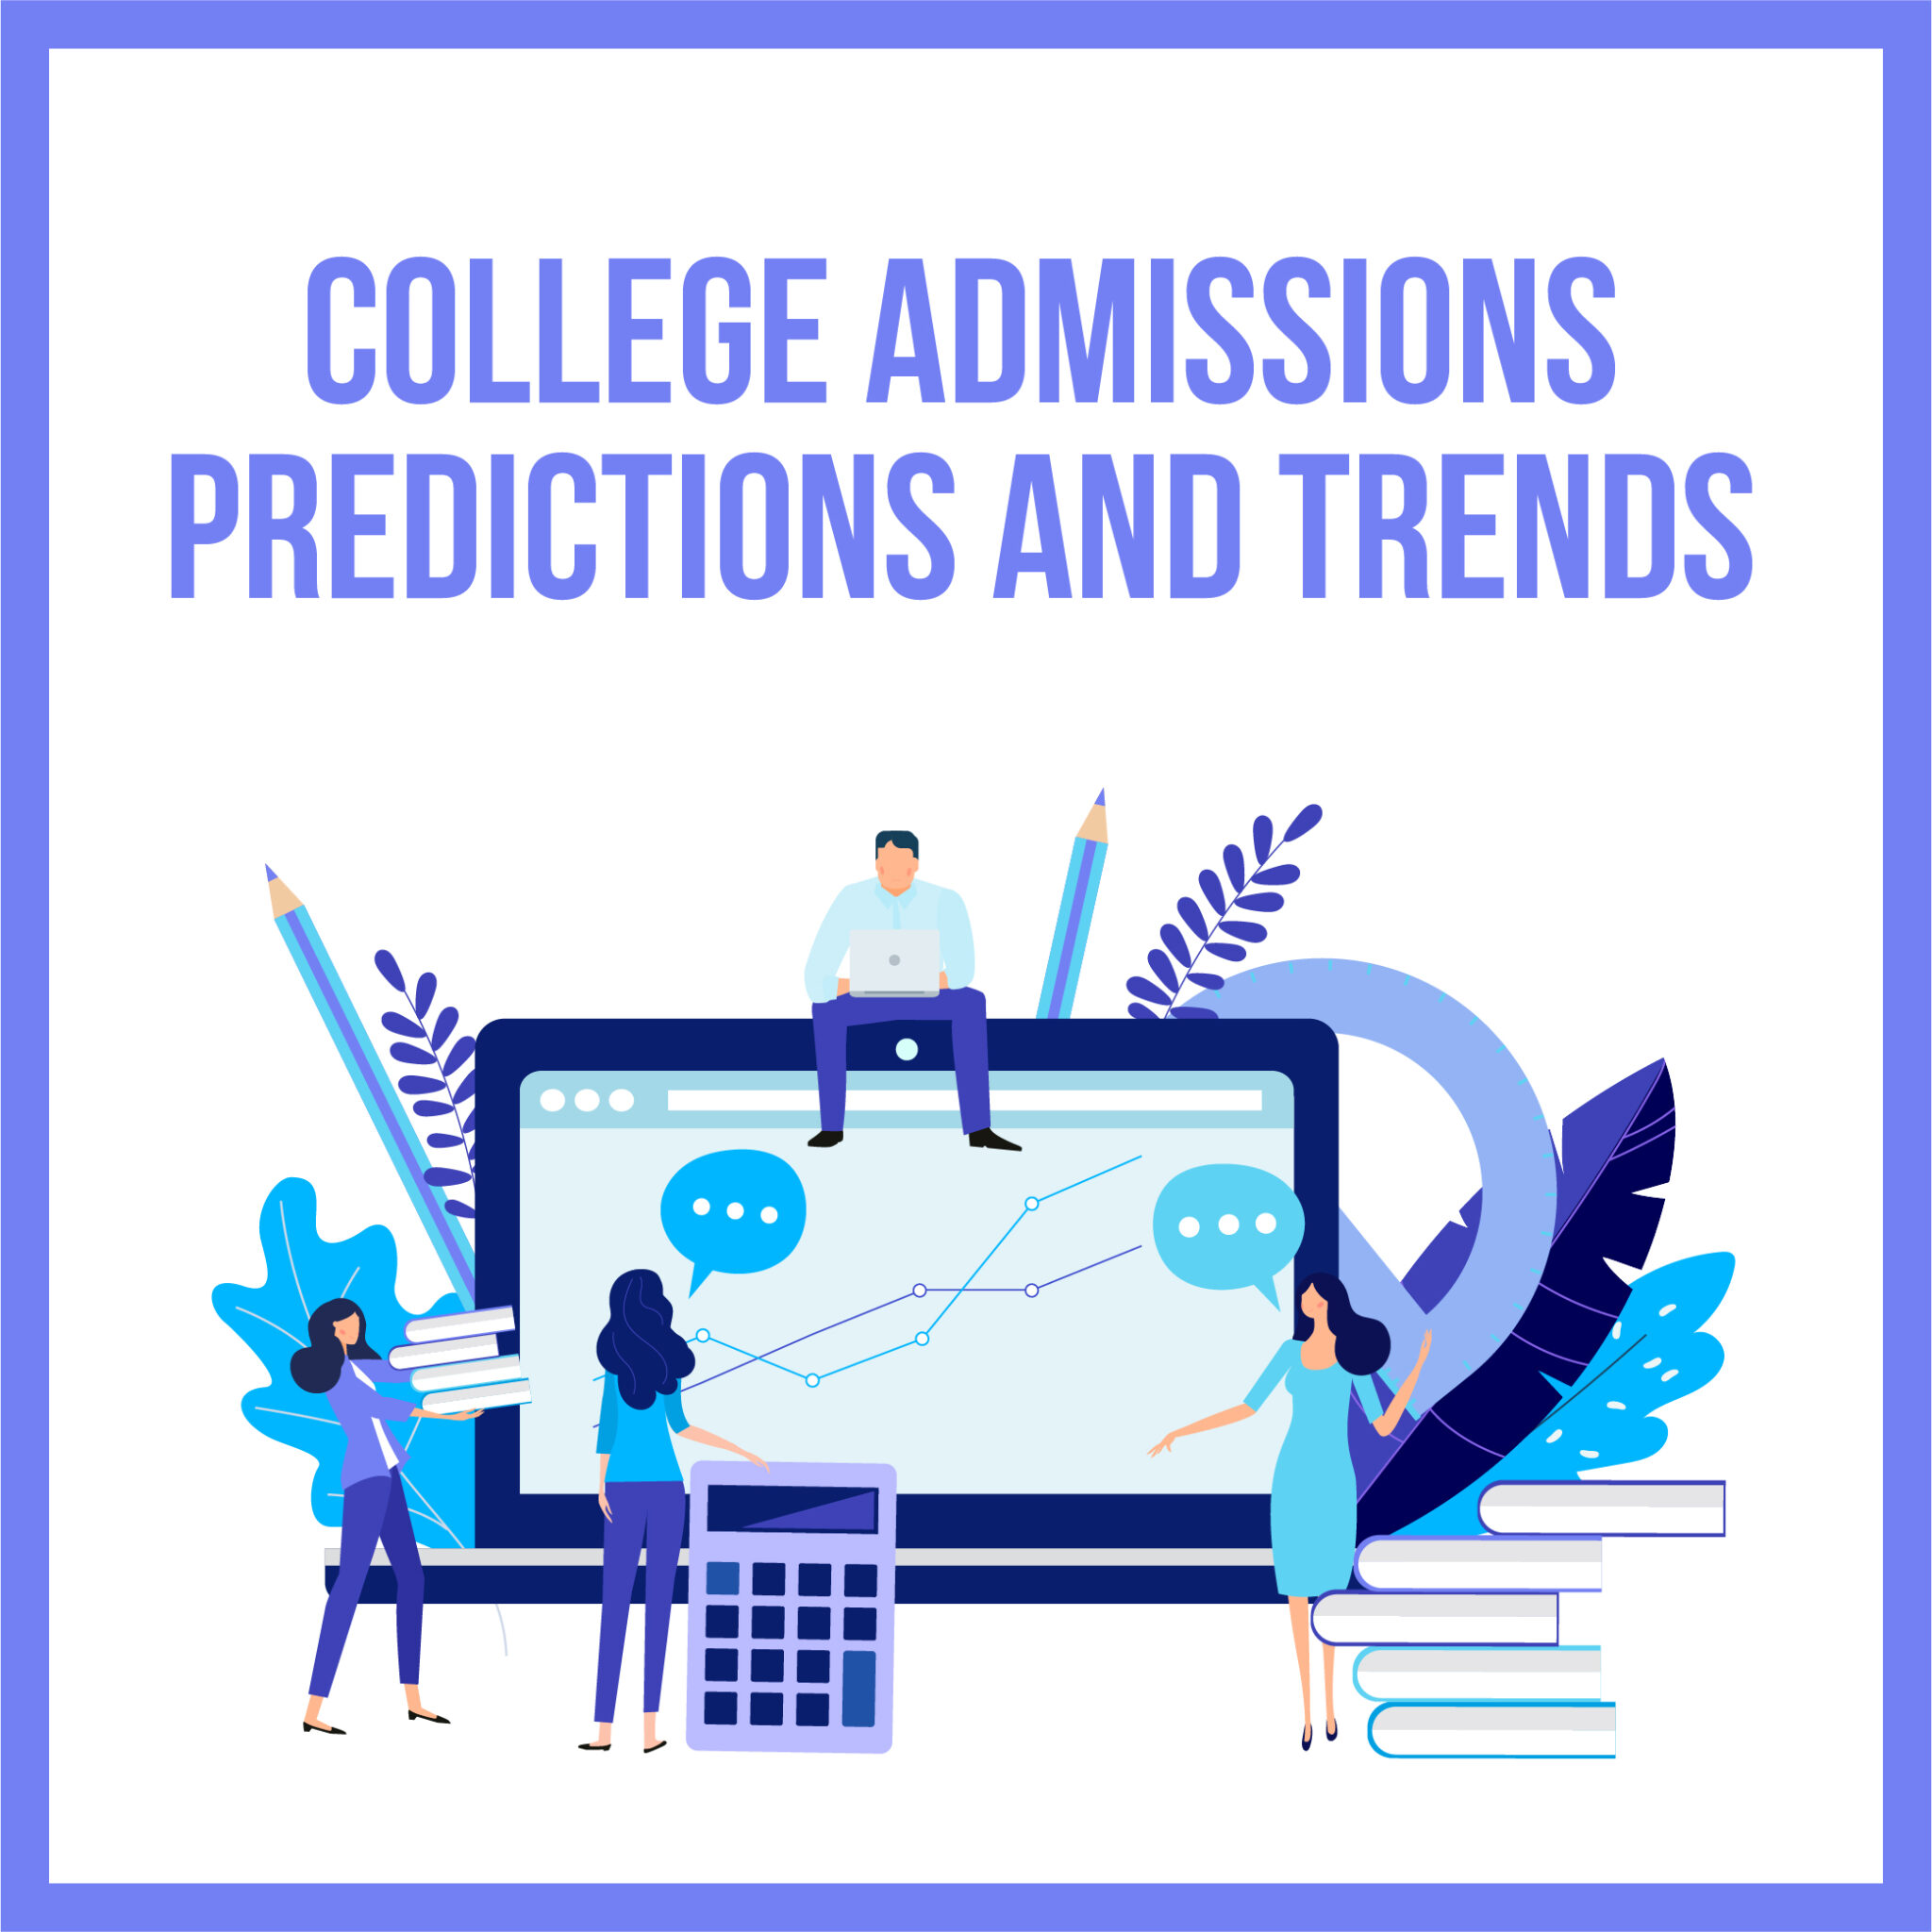 College Admissions Predictions & Trends for the Future